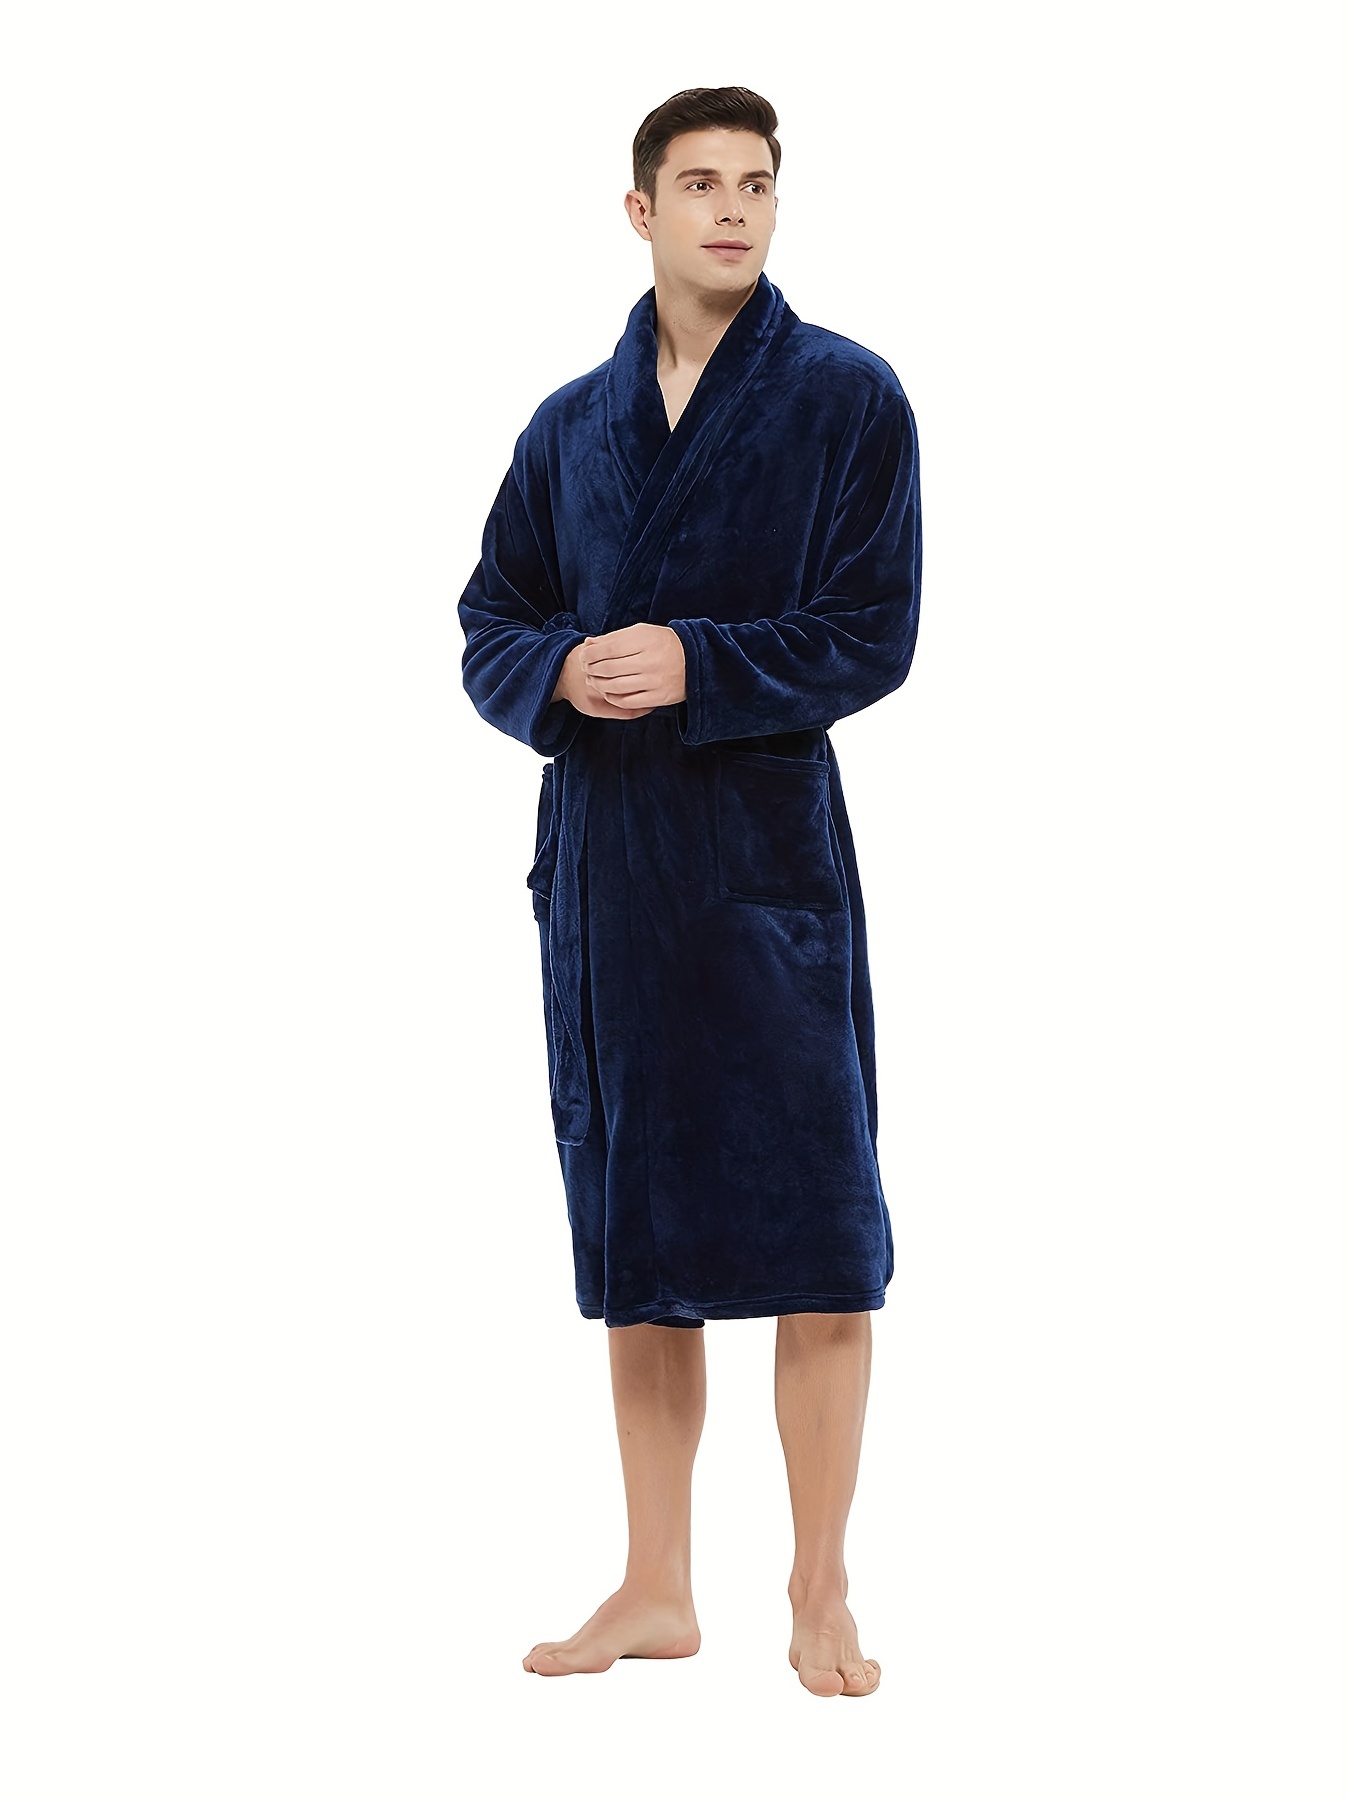 Men's Trendy Soft Comfy Plain Color Robe For Home Pajamas Wear Night-robe  Sets After A Bath